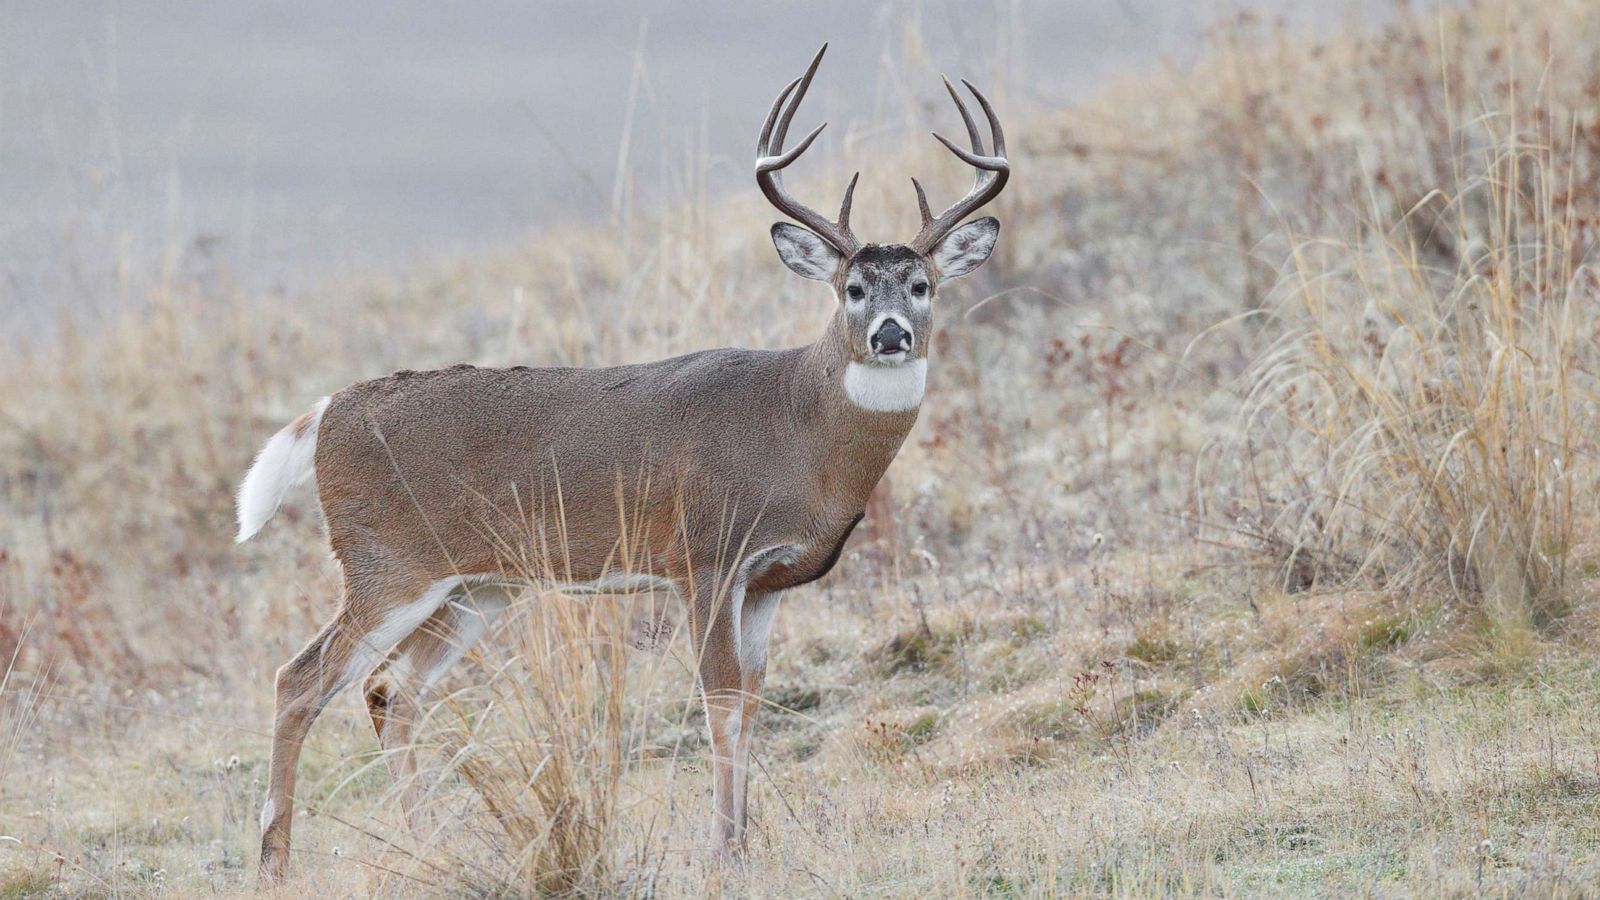 Arkansas hunter dies after being attacked by deer he thought was dead - ABC...